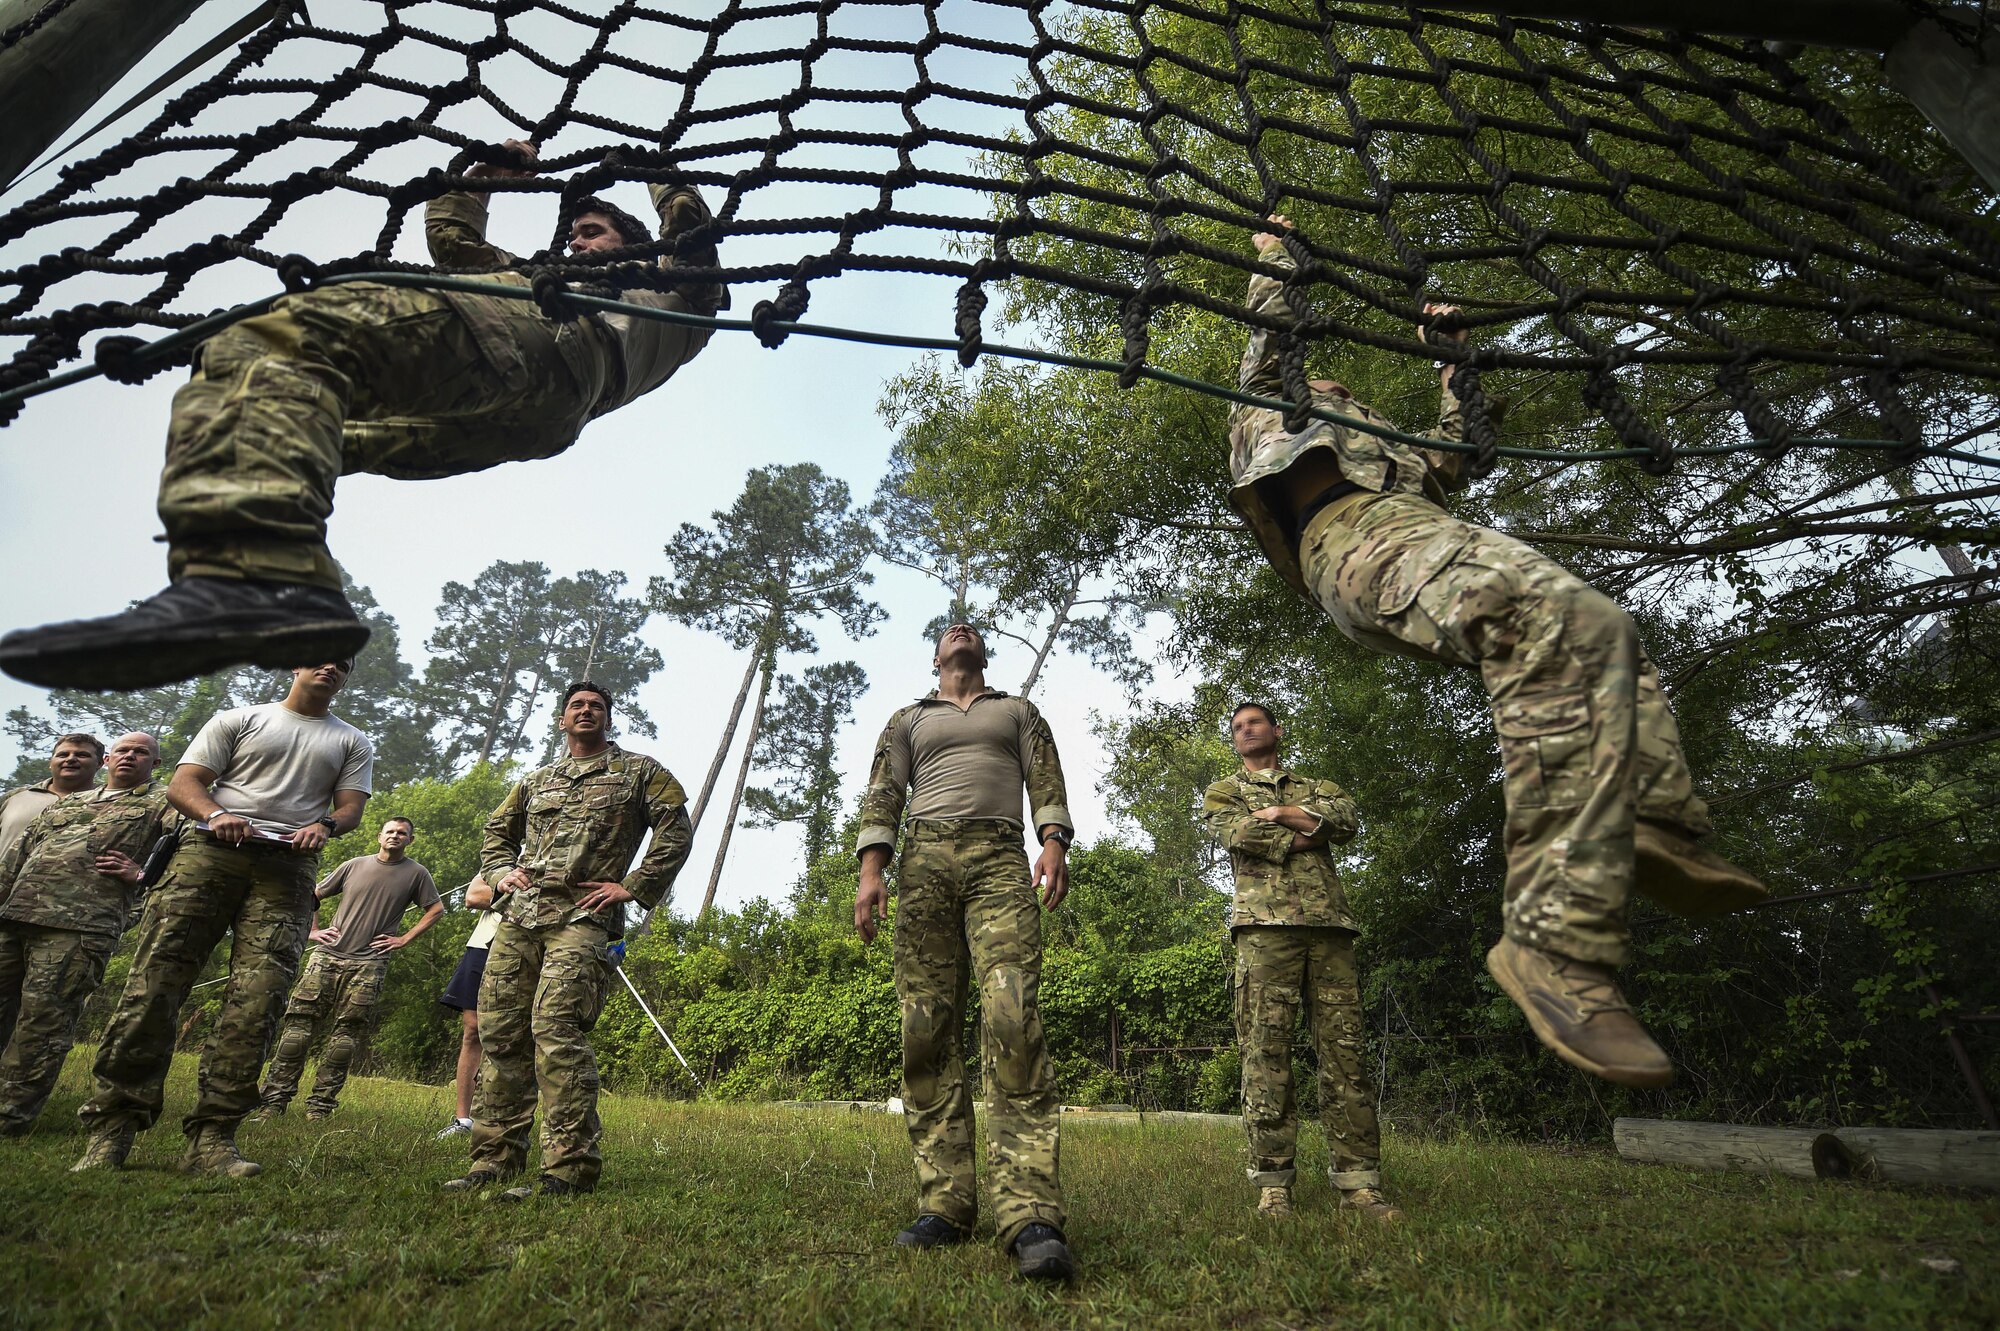 Monster Mash Team 2, begins an obstacle course during a Monster Mash, at Hurlburt Field, Fla., May 12, 2016. Monster Mash is a long-standing Special Tactics training tradition, consisting of an obstacle course where special operators complete timed scenarios at different stations of core mission training. The event was held in honor of Chief Master Sgt. Bruce W. Dixon, the command chief of the 24th Special Operations Wing, who is retiring after a 30-year career as a combat controller. (U.S. Air Force photo by Senior Airman Ryan Conroy)   